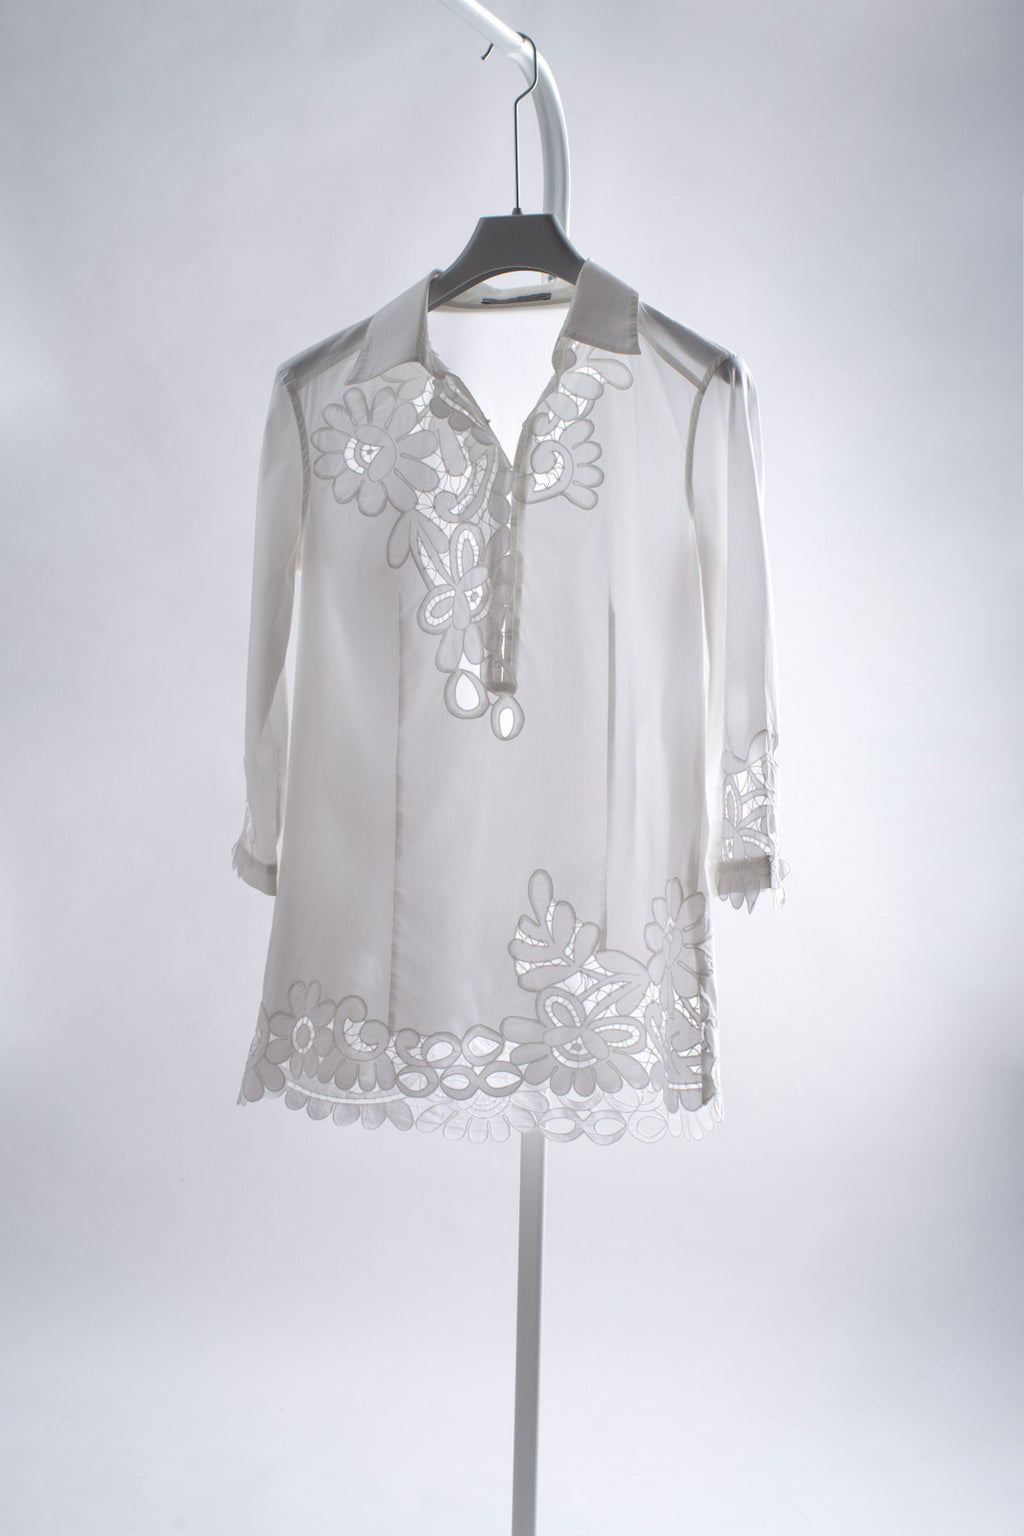 Ermanno Scervino Broderie Anglaise White Shirt, Size S